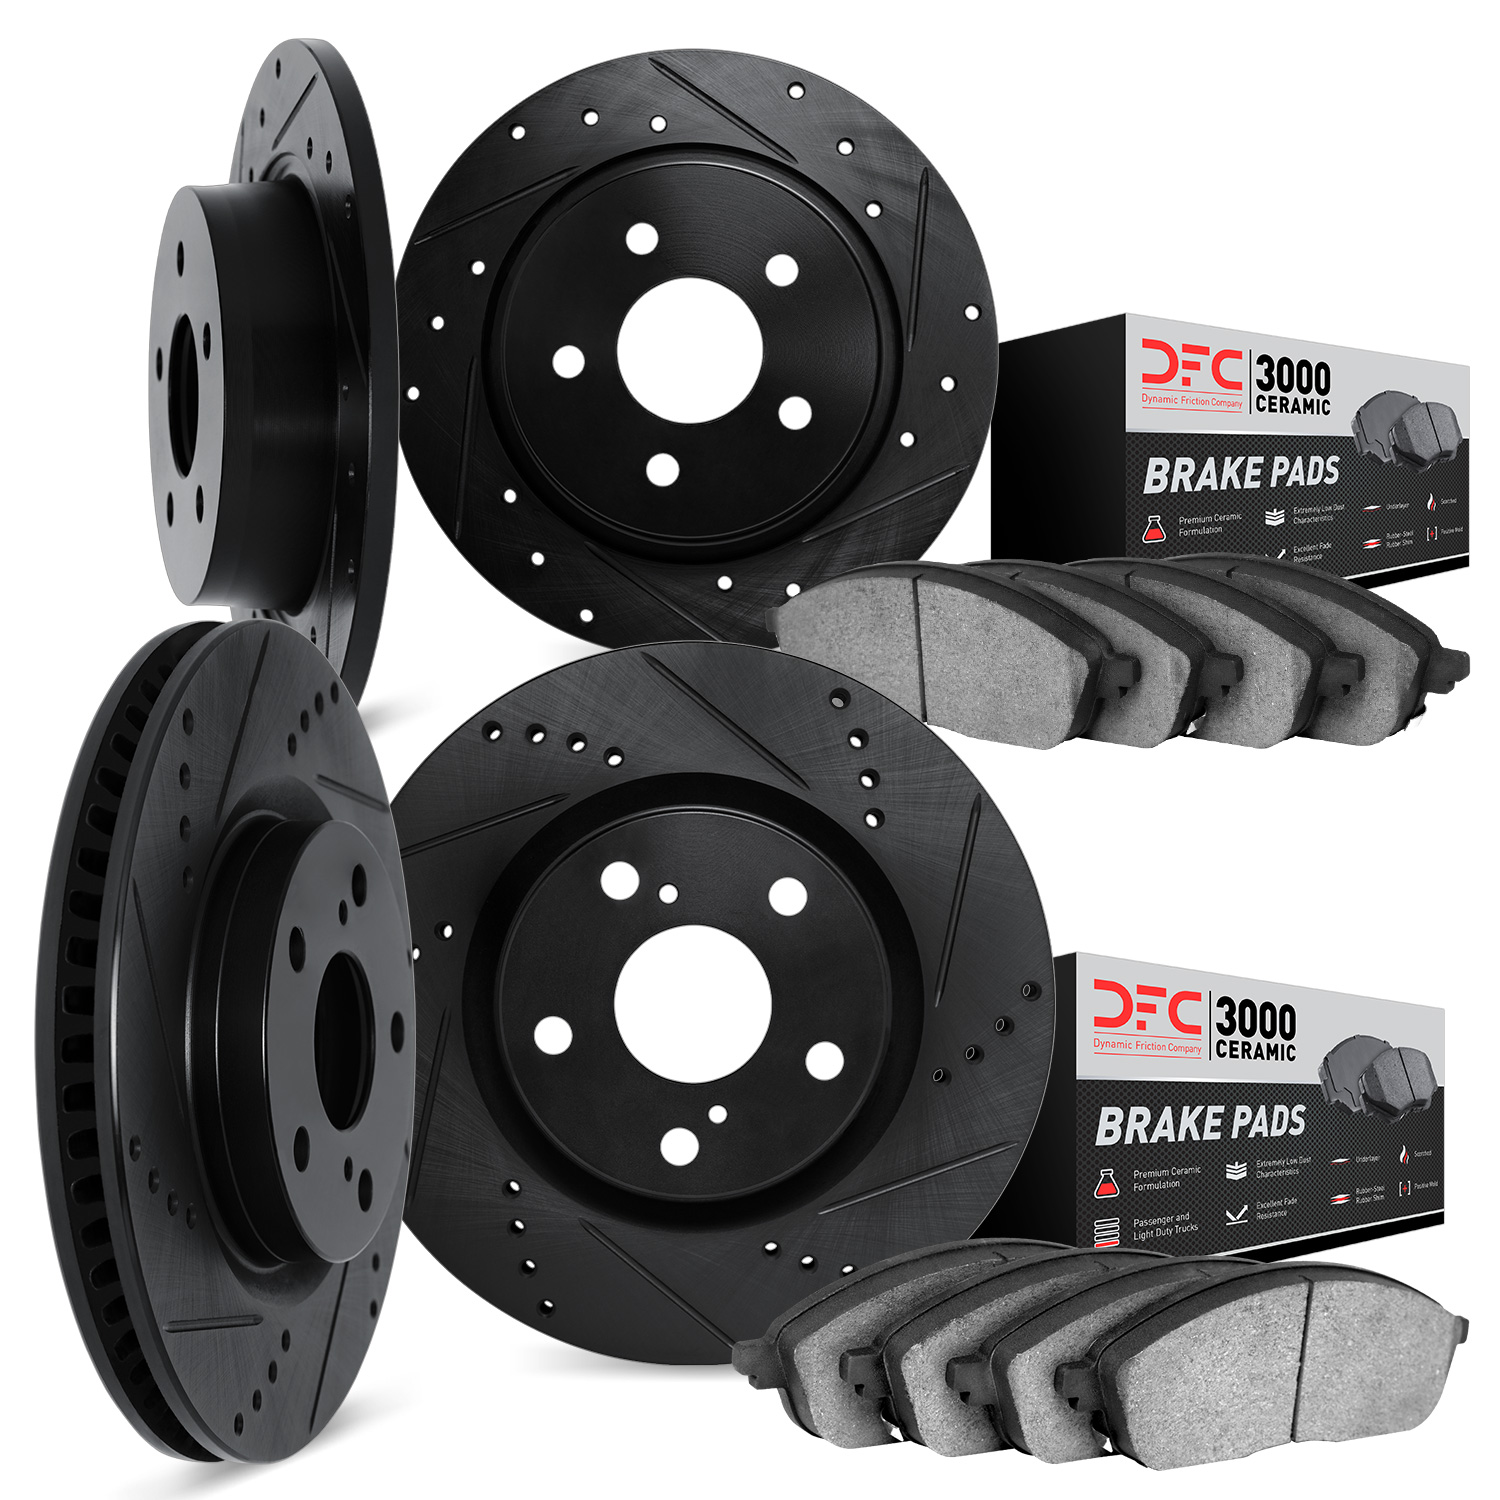 8304-59036 Drilled/Slotted Brake Rotors with 3000-Series Ceramic Brake Pads Kit [Black], 2016-2016 Acura/Honda, Position: Front